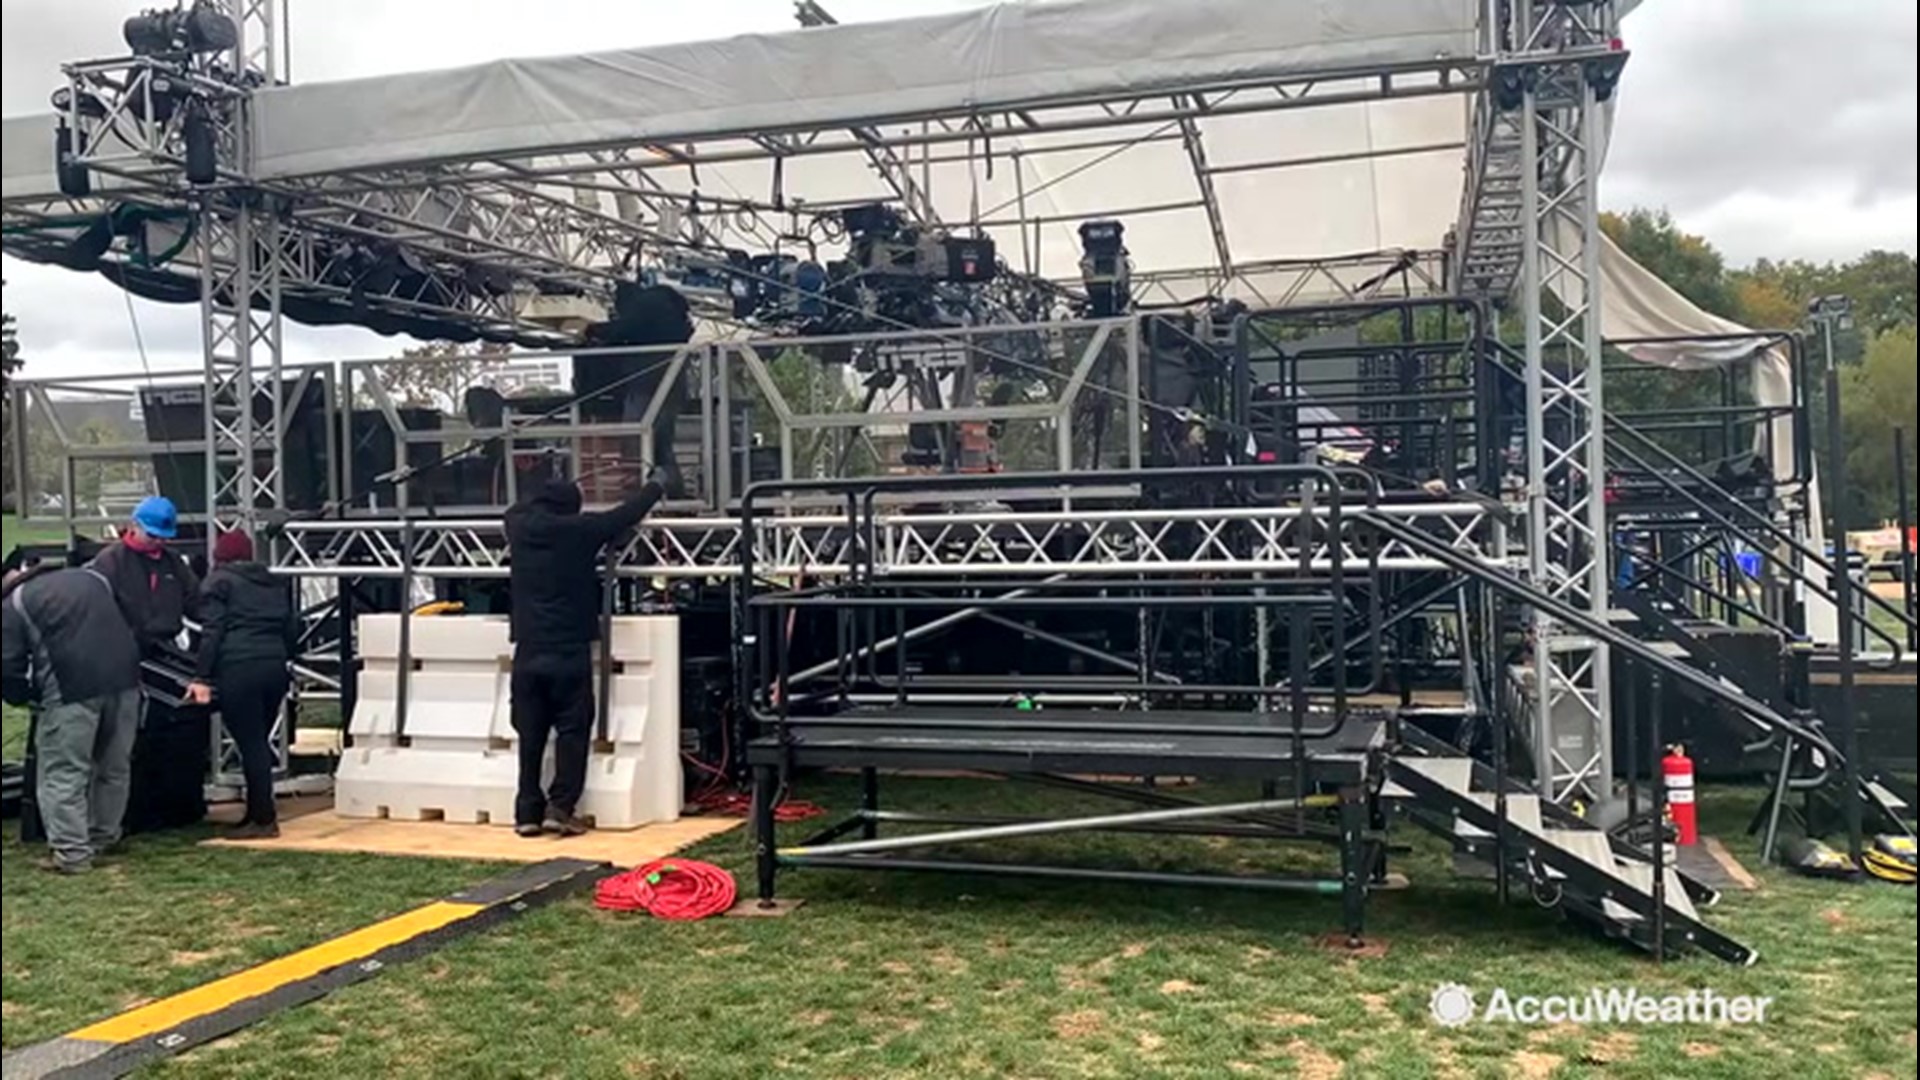 College Gameday is in Penn State in preparation for the Nittany Lions' upcoming match against the Michigan Wolverines. This is a time-lapse video of the setup in downtown State College, Pennsylvania, on Oct. 17.